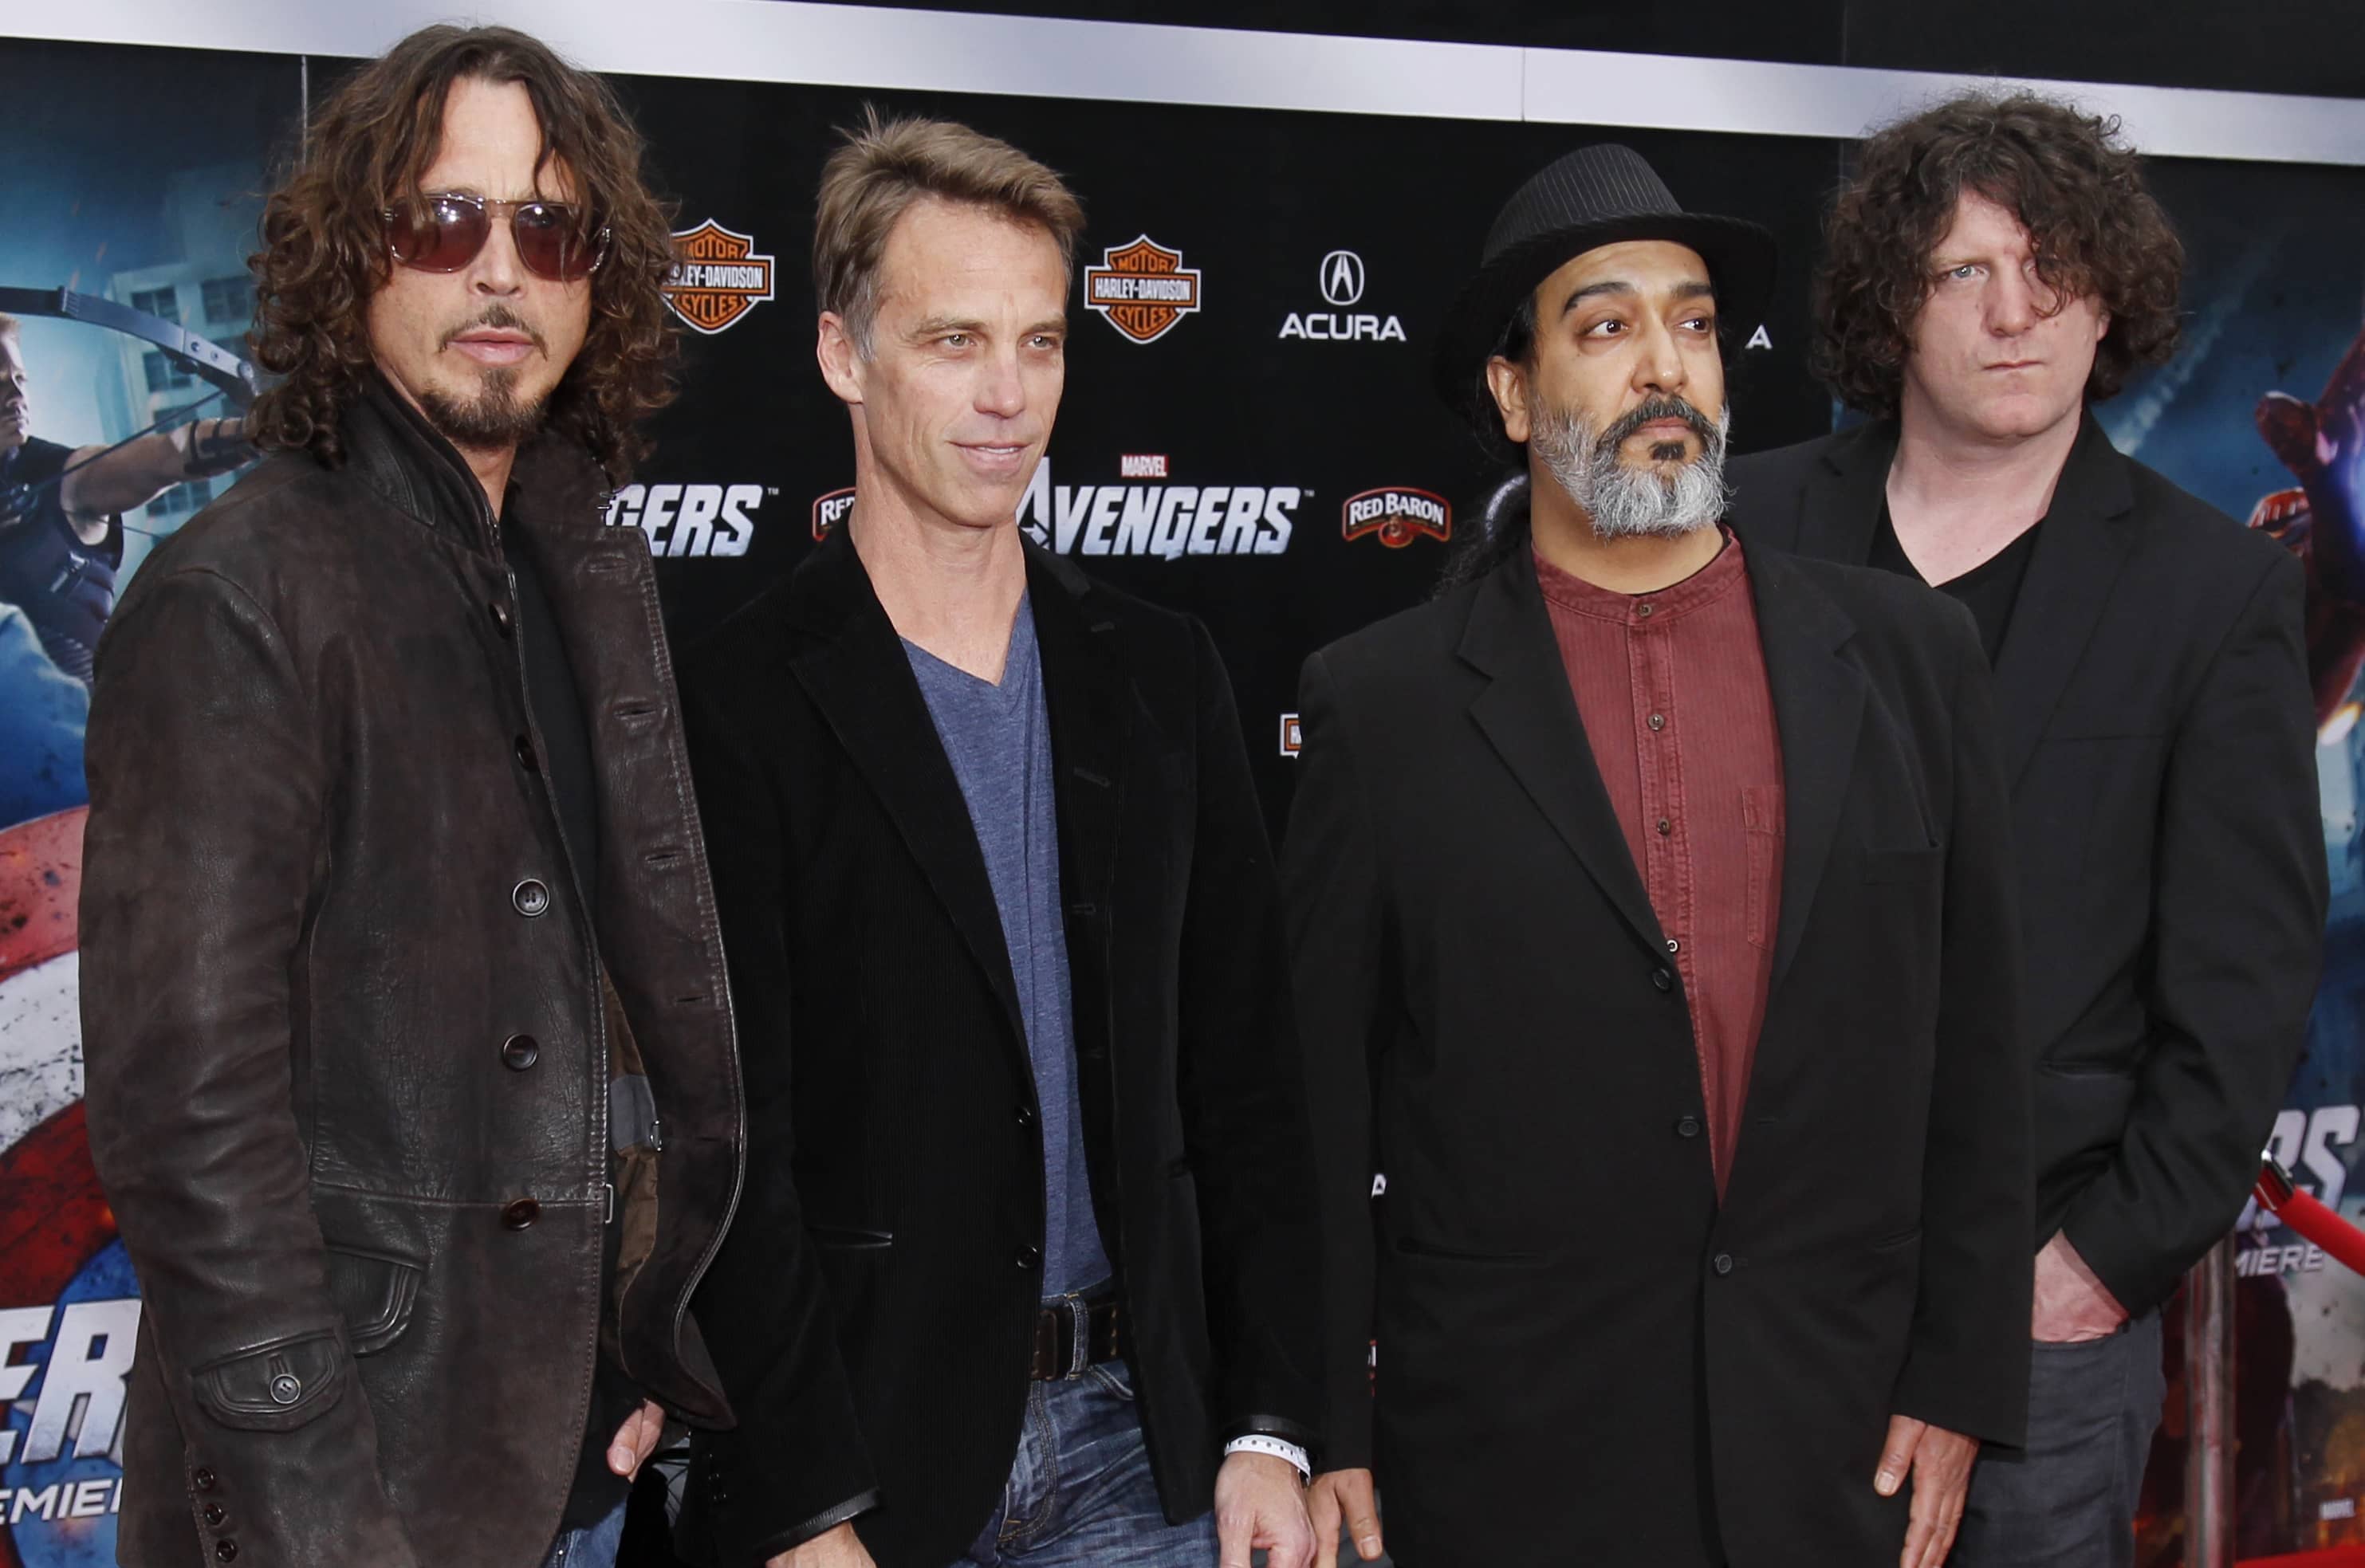 band-members-of-soundgarden-chris-cornell-matt-cameron-kim-thayil-and-ben-shepherd-pose-at-the-world-premiere-of-the-film-marvels-the-avengers-in-hollywood